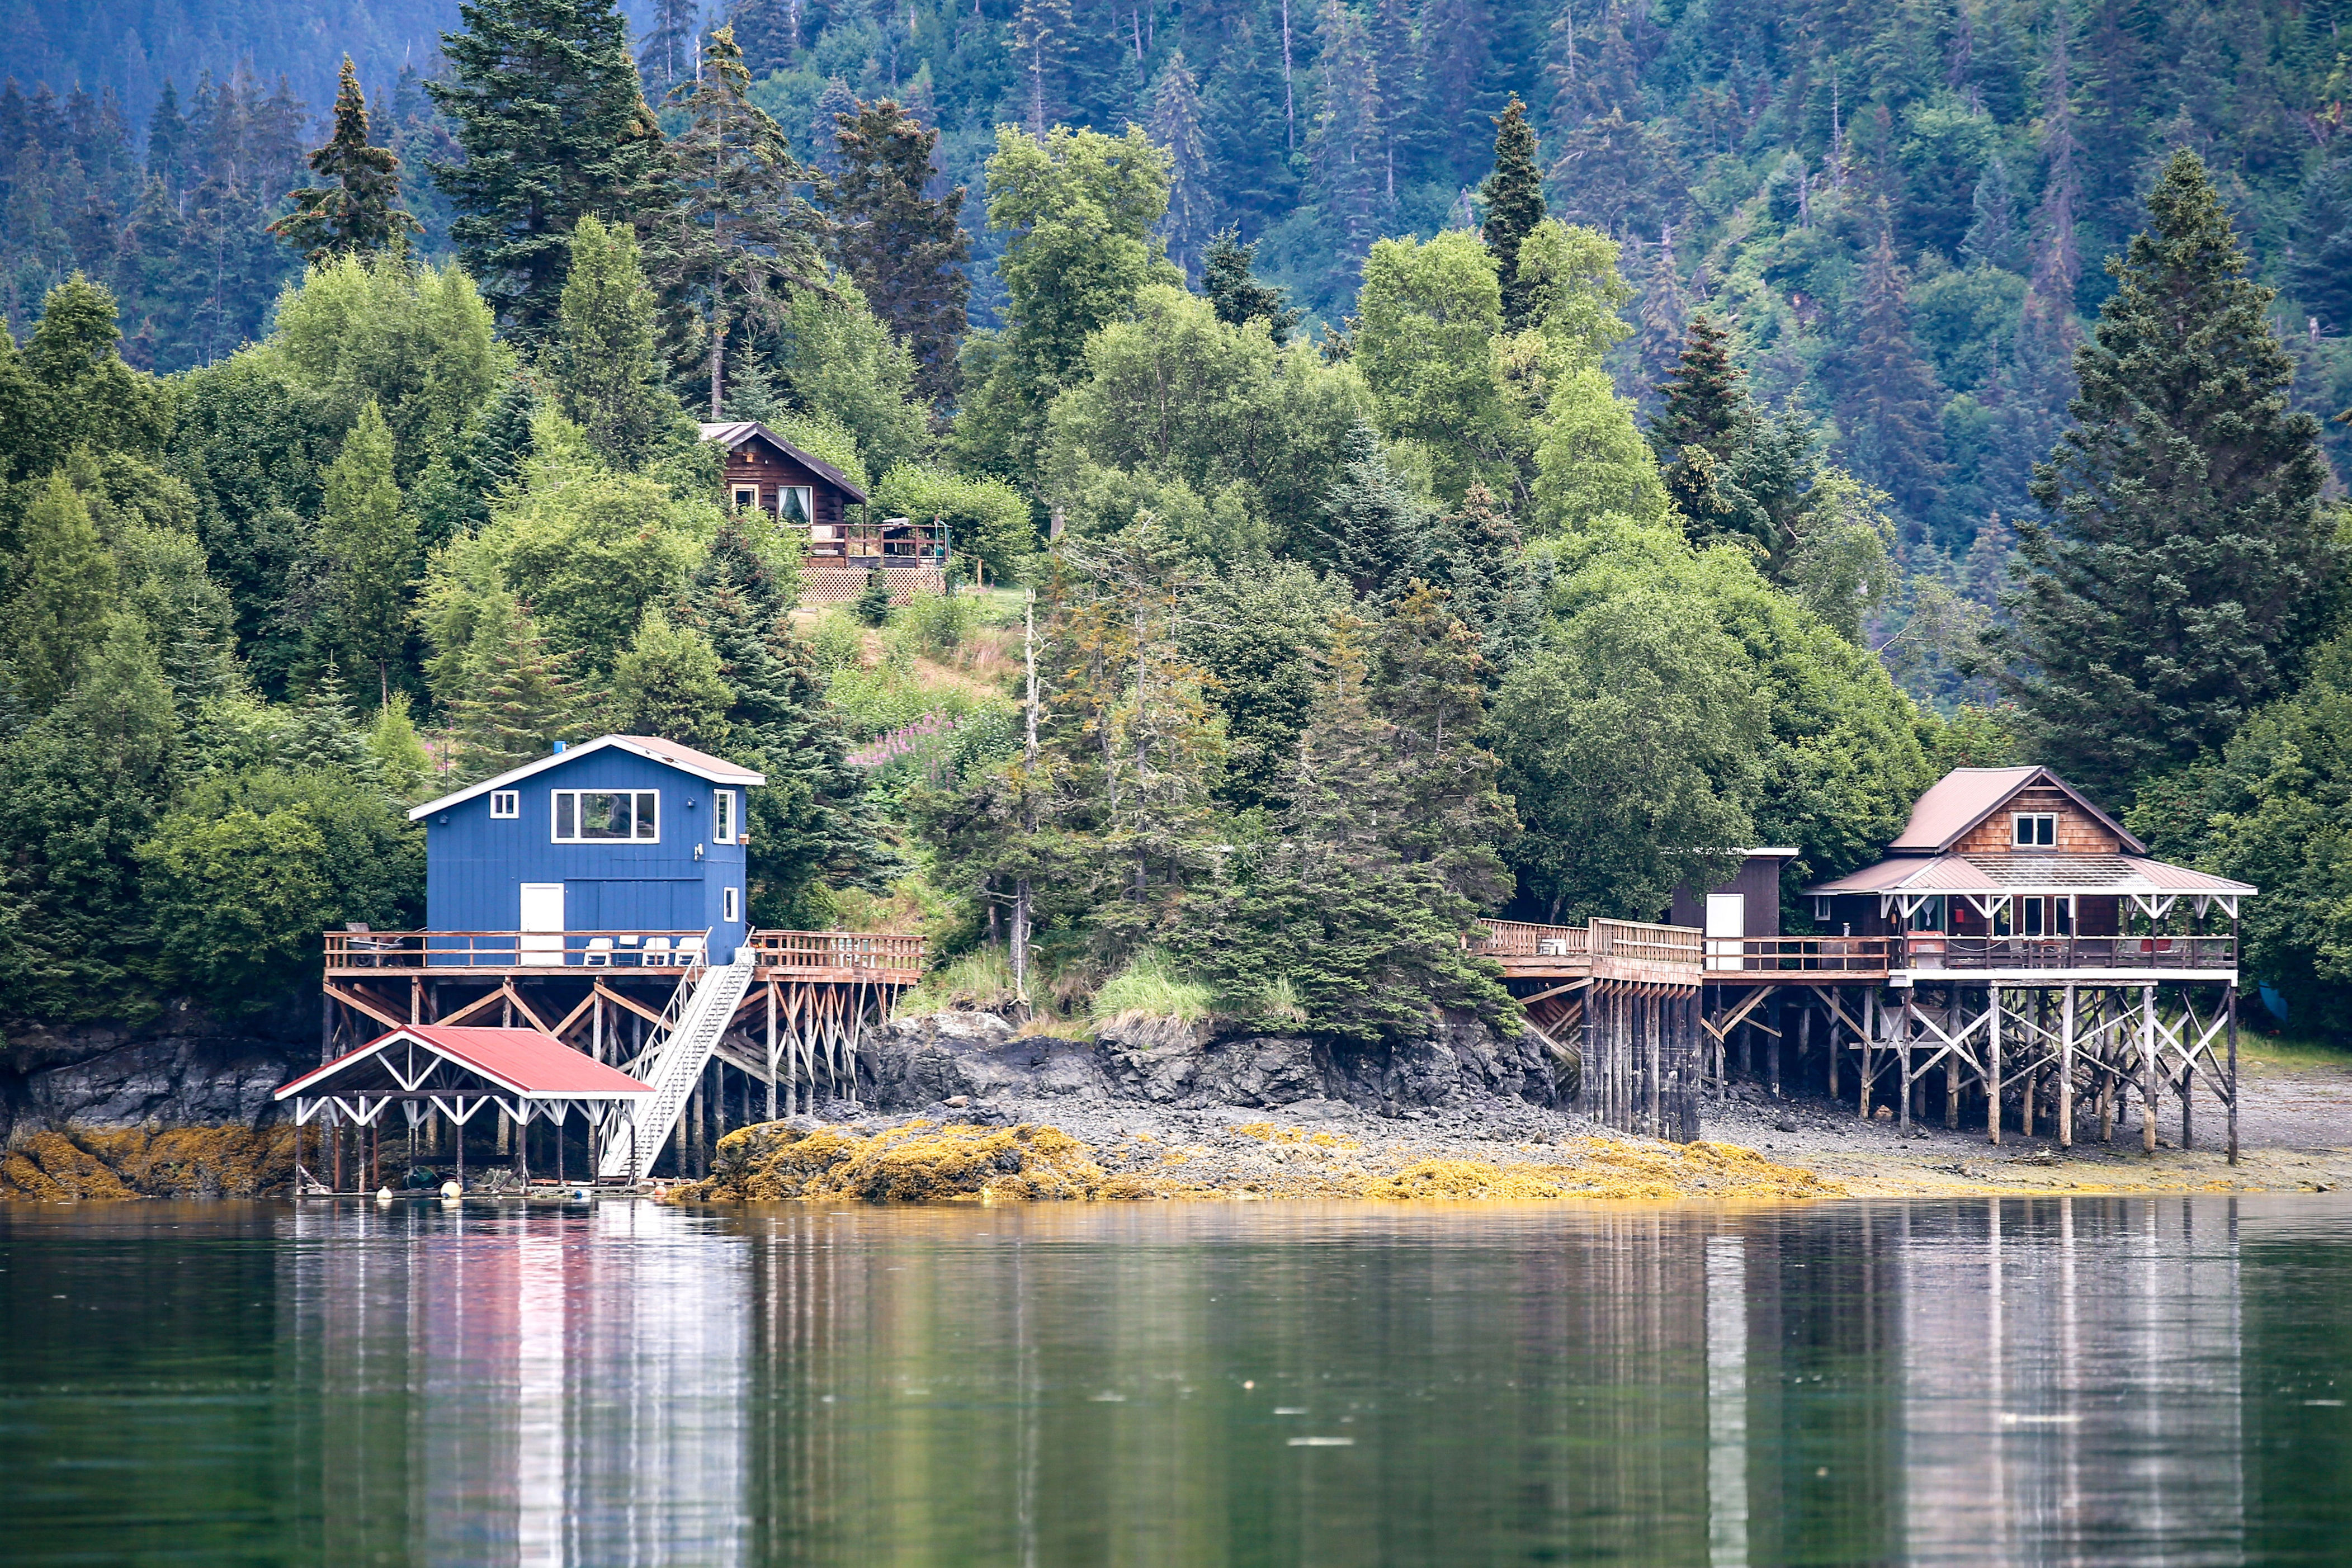 Situated in Alaska’s spectacular Kachemak Bay State Park, Halibut Cove is like the poster child for peaceful, car-free towns. There are no roads here, so people get around on foot or by ATV or seaplane. And aside from several rustic, timber-framed lodges, most of the buildings sit on stilts or float on docks. What’s <em>not</em> to love about a floating amphitheater, floating espresso bar, and floating post office?<p>Sign up to receive the latest news, expert tips, and inspiration on all things travel</p><a href="https://www.cntraveler.com/newsletter/the-daily?sourceCode=msnsend">Inspire Me</a>